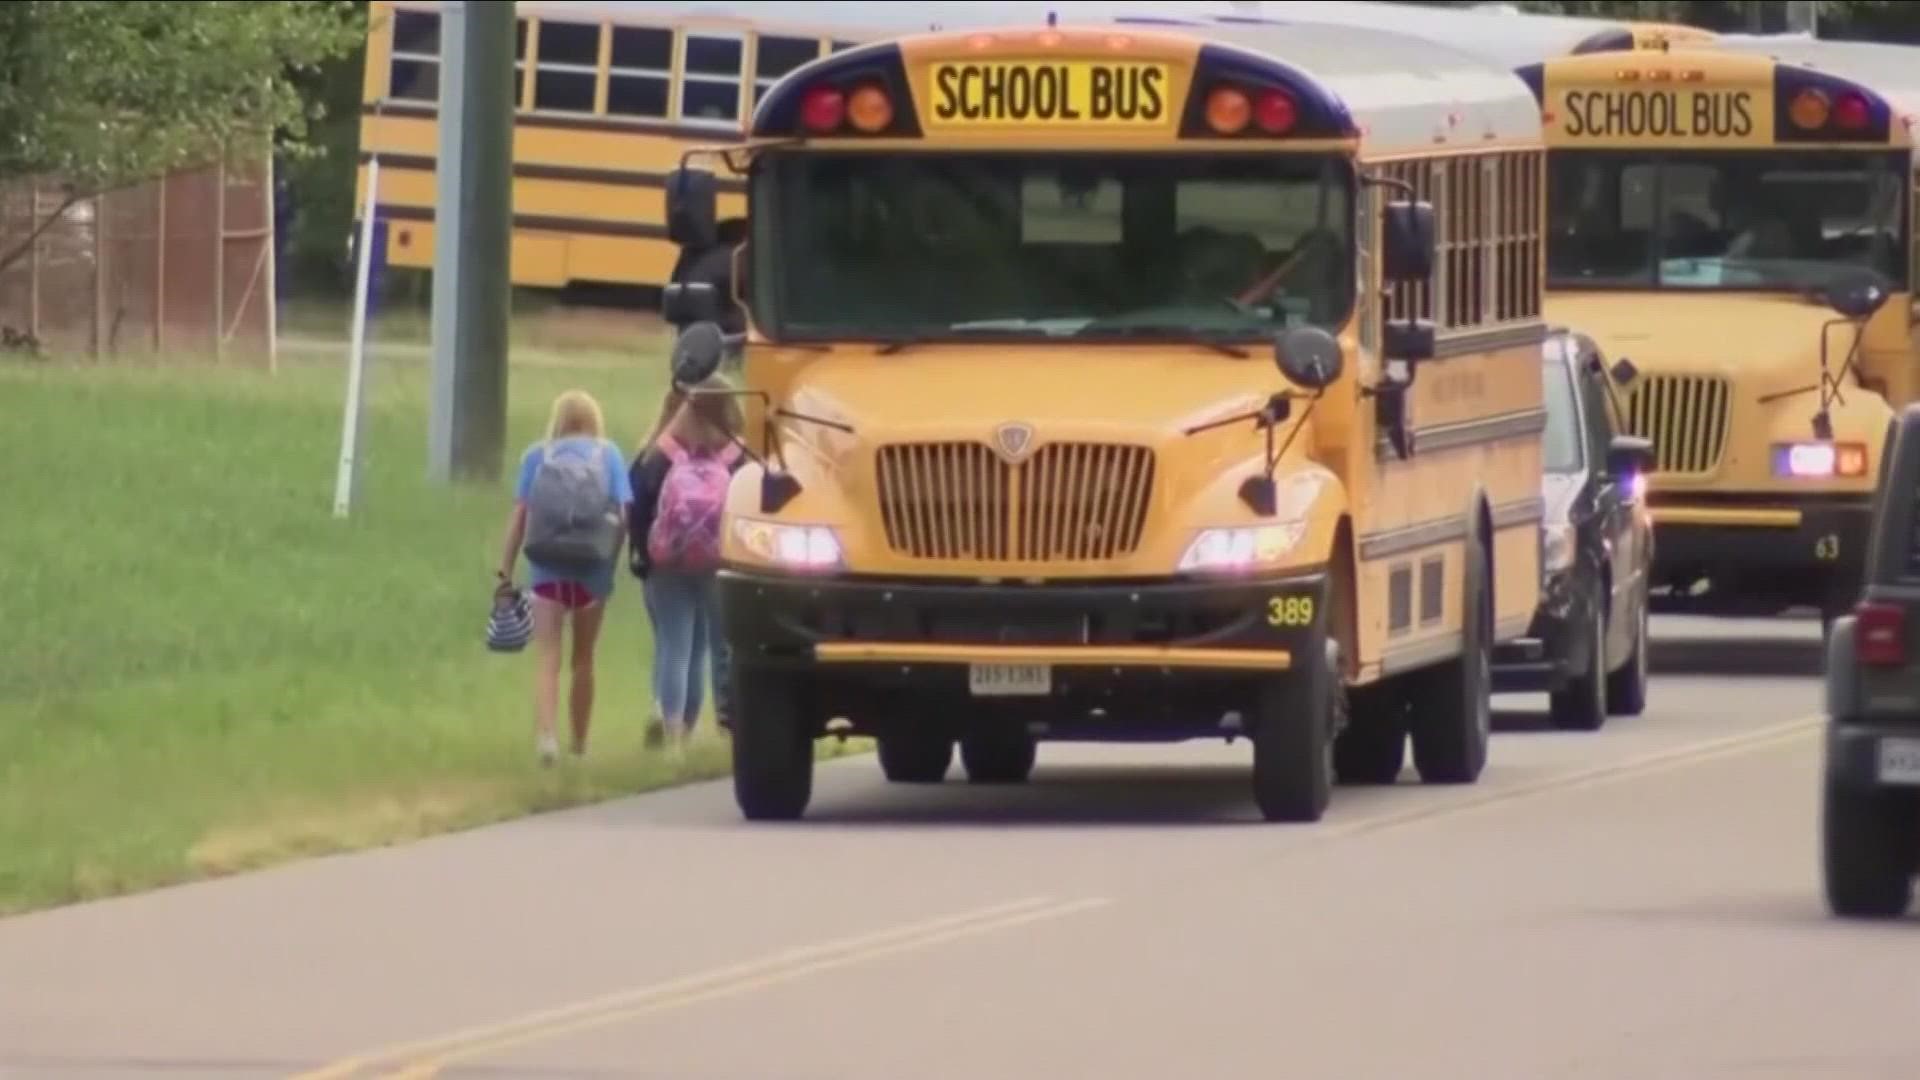 In these last few weeks of summer vacation, some school districts are using this time to find new recruits.